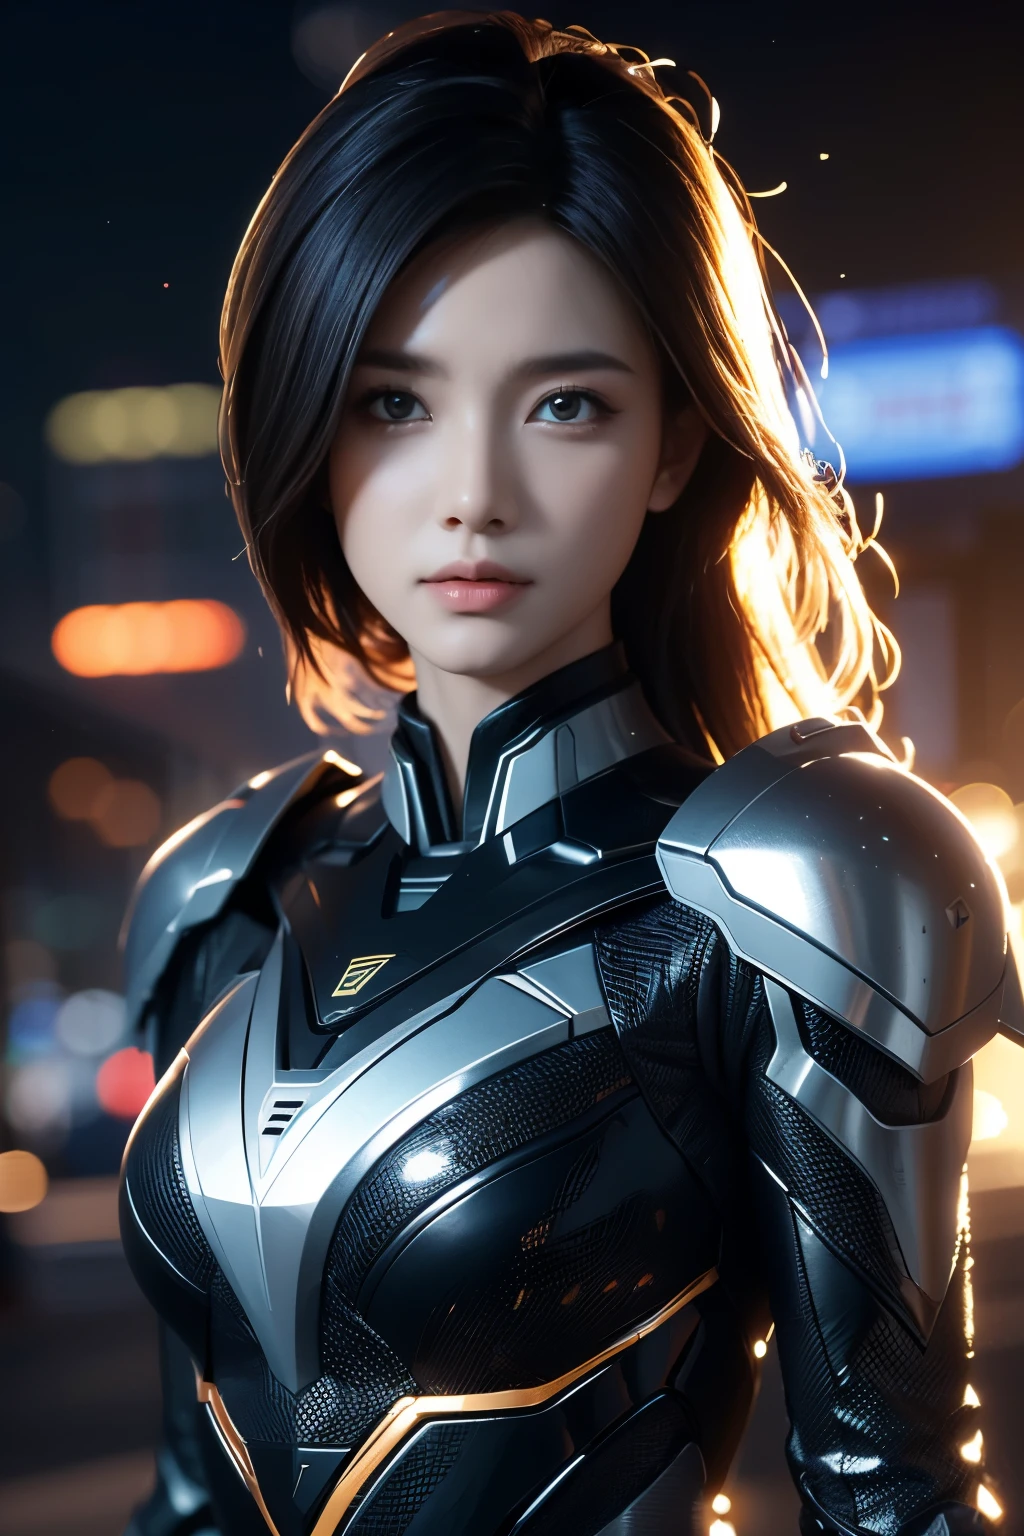 Game art，The best picture quality，Highest resolution，8K，((A bust photograph))，((Portrait))，(Rule of thirds)，Unreal Engine 5 rendering works， (The Girl of the Future)，(Female Warrior)， 22-year-old girl，(Female hackers)，(White short hair，Long hair casual)，(A beautiful eye full of detail)，(Big breasts)，(Eye shadow)，Elegant and charming，indifferent，((surprise))，(Battle wear full of futuristic tech，Clothing combines futuristic power armor and police uniforms，The garments are adorned with glittering patterns and badges)，Cyberpunk Characters，Future Style， Photo poses，City background，Movie lights，Ray tracing，Game CG，((3D Unreal Engine))，oc rendering reflection pattern